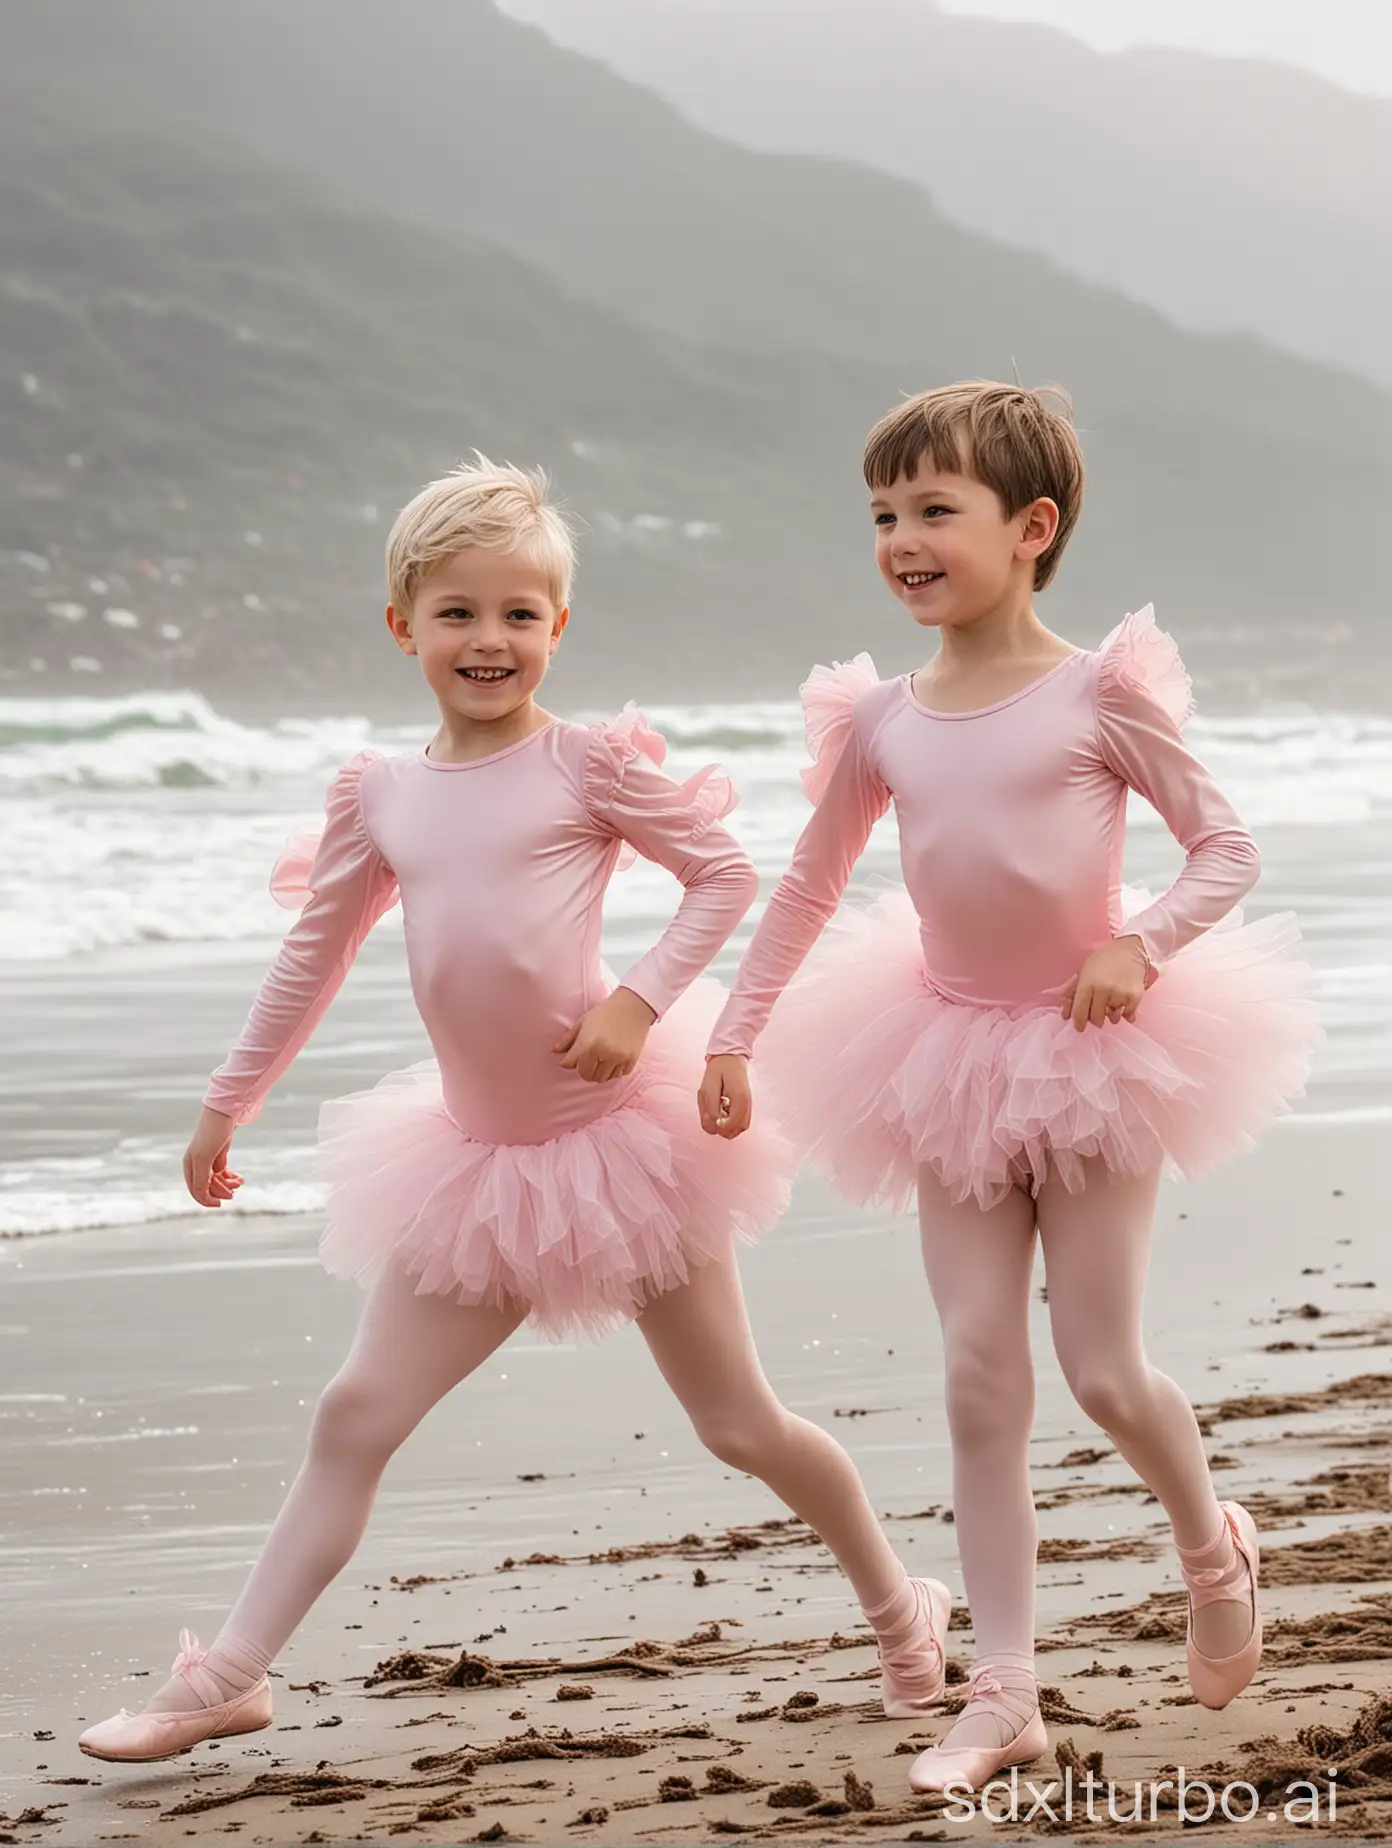 (((Gender role reversal))), A few short-haired 8-year-old boys running gaily along a beach shoreline in silky pink ballerina leotards with sleeves and frilly tutus, energetic